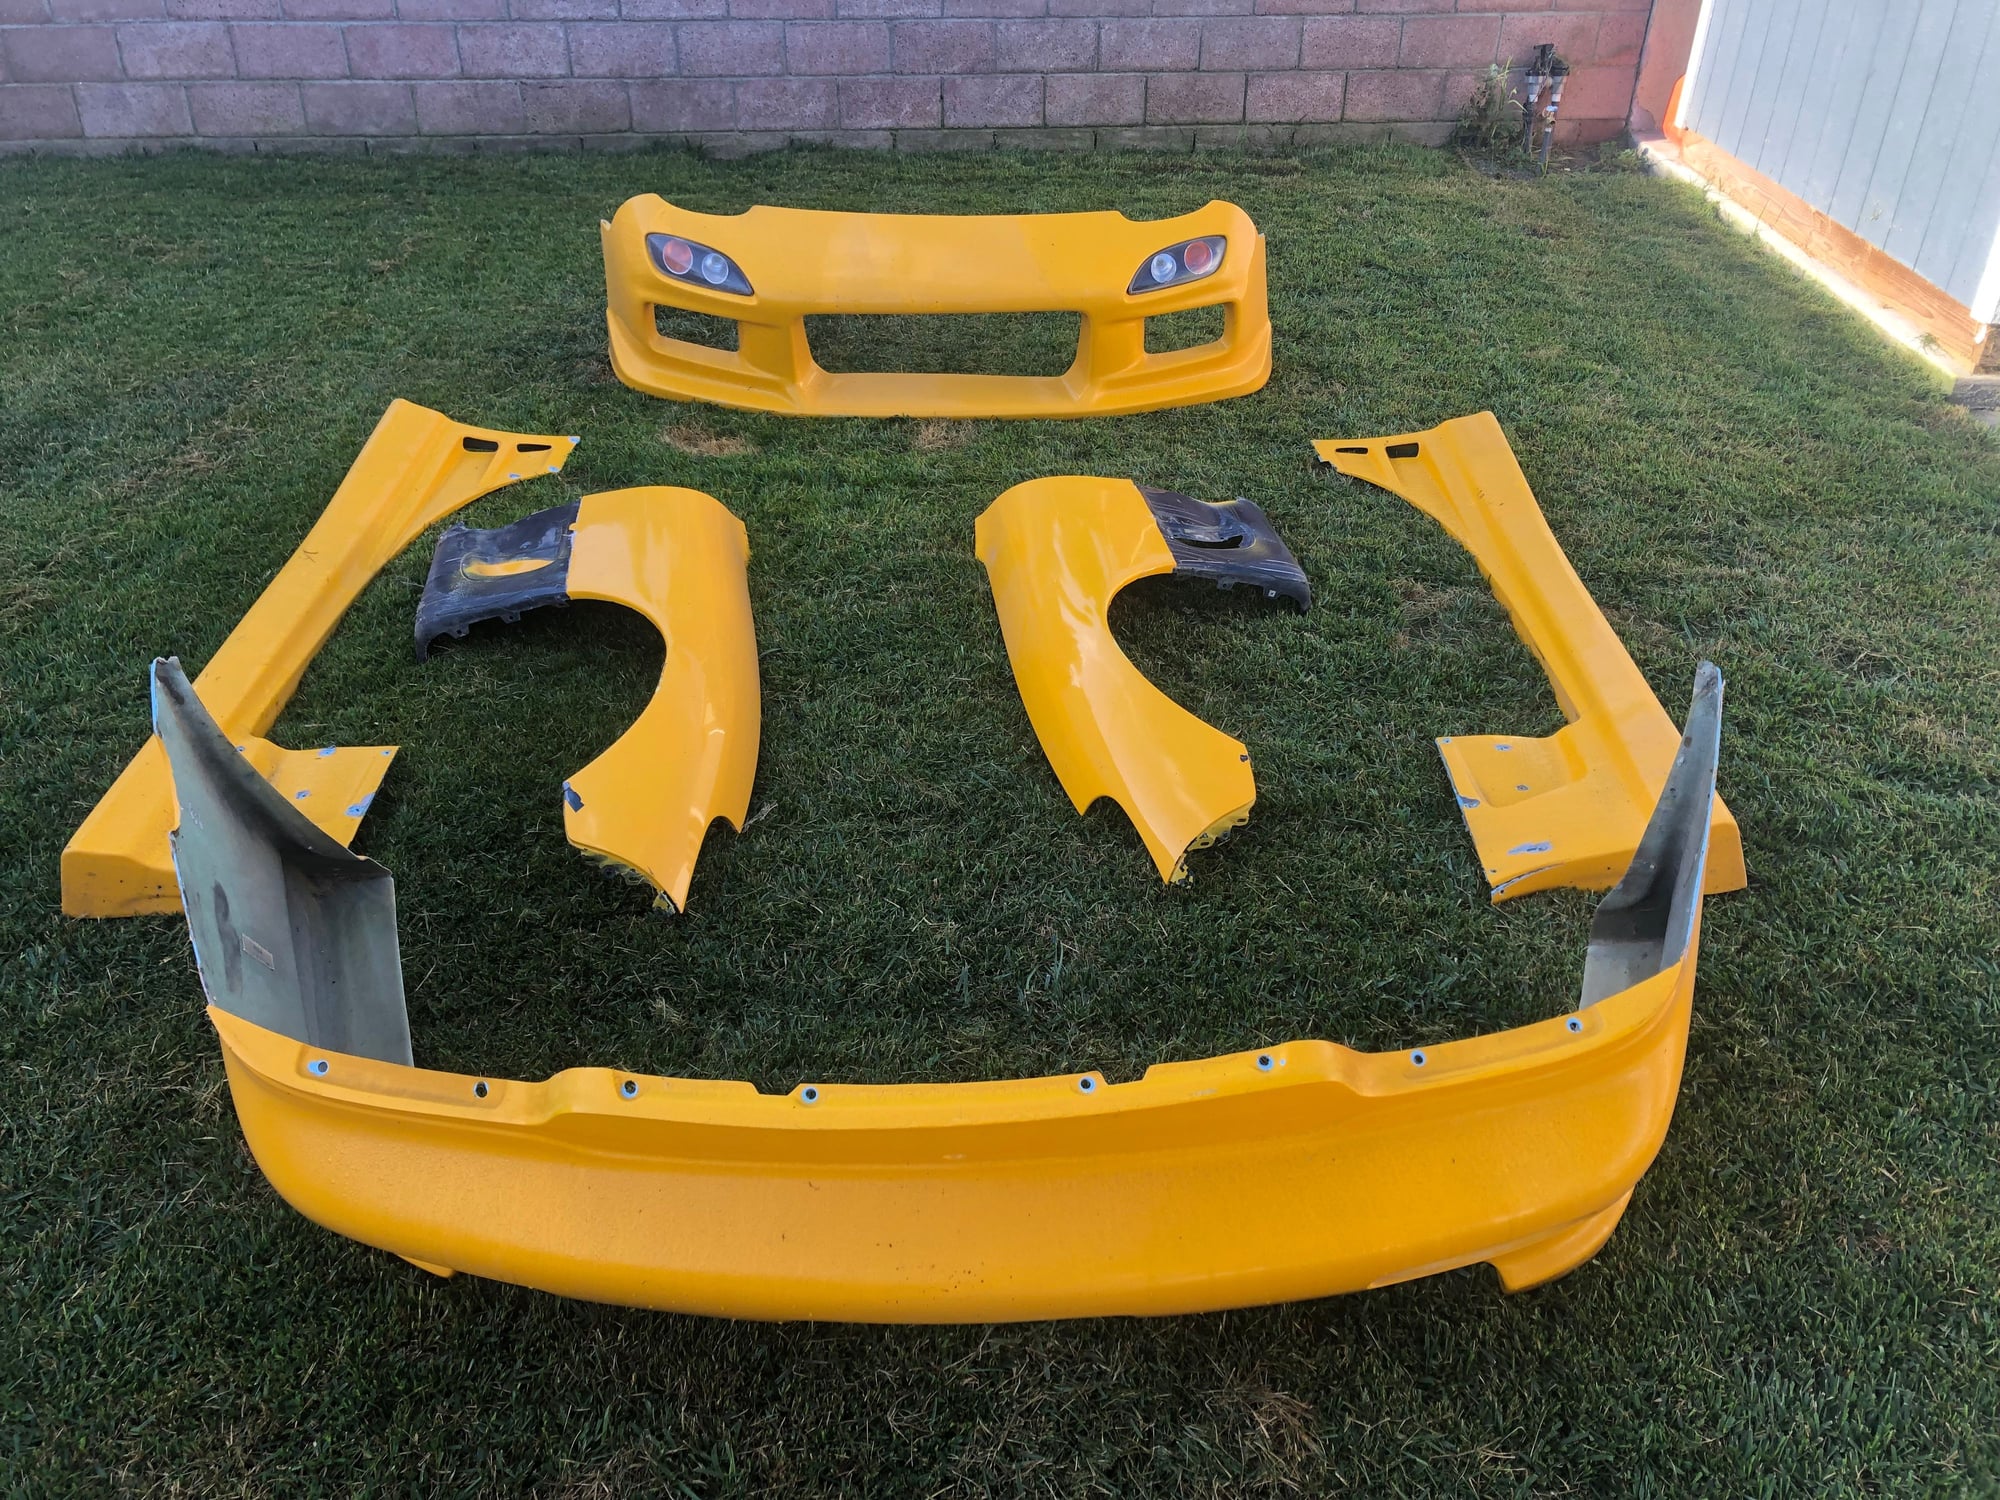 Exterior Body Parts - GTP International fiberglass body kit with OEM fenders - Used - 1993 to 2002 Mazda RX-7 - Long Beach, CA 90808, United States